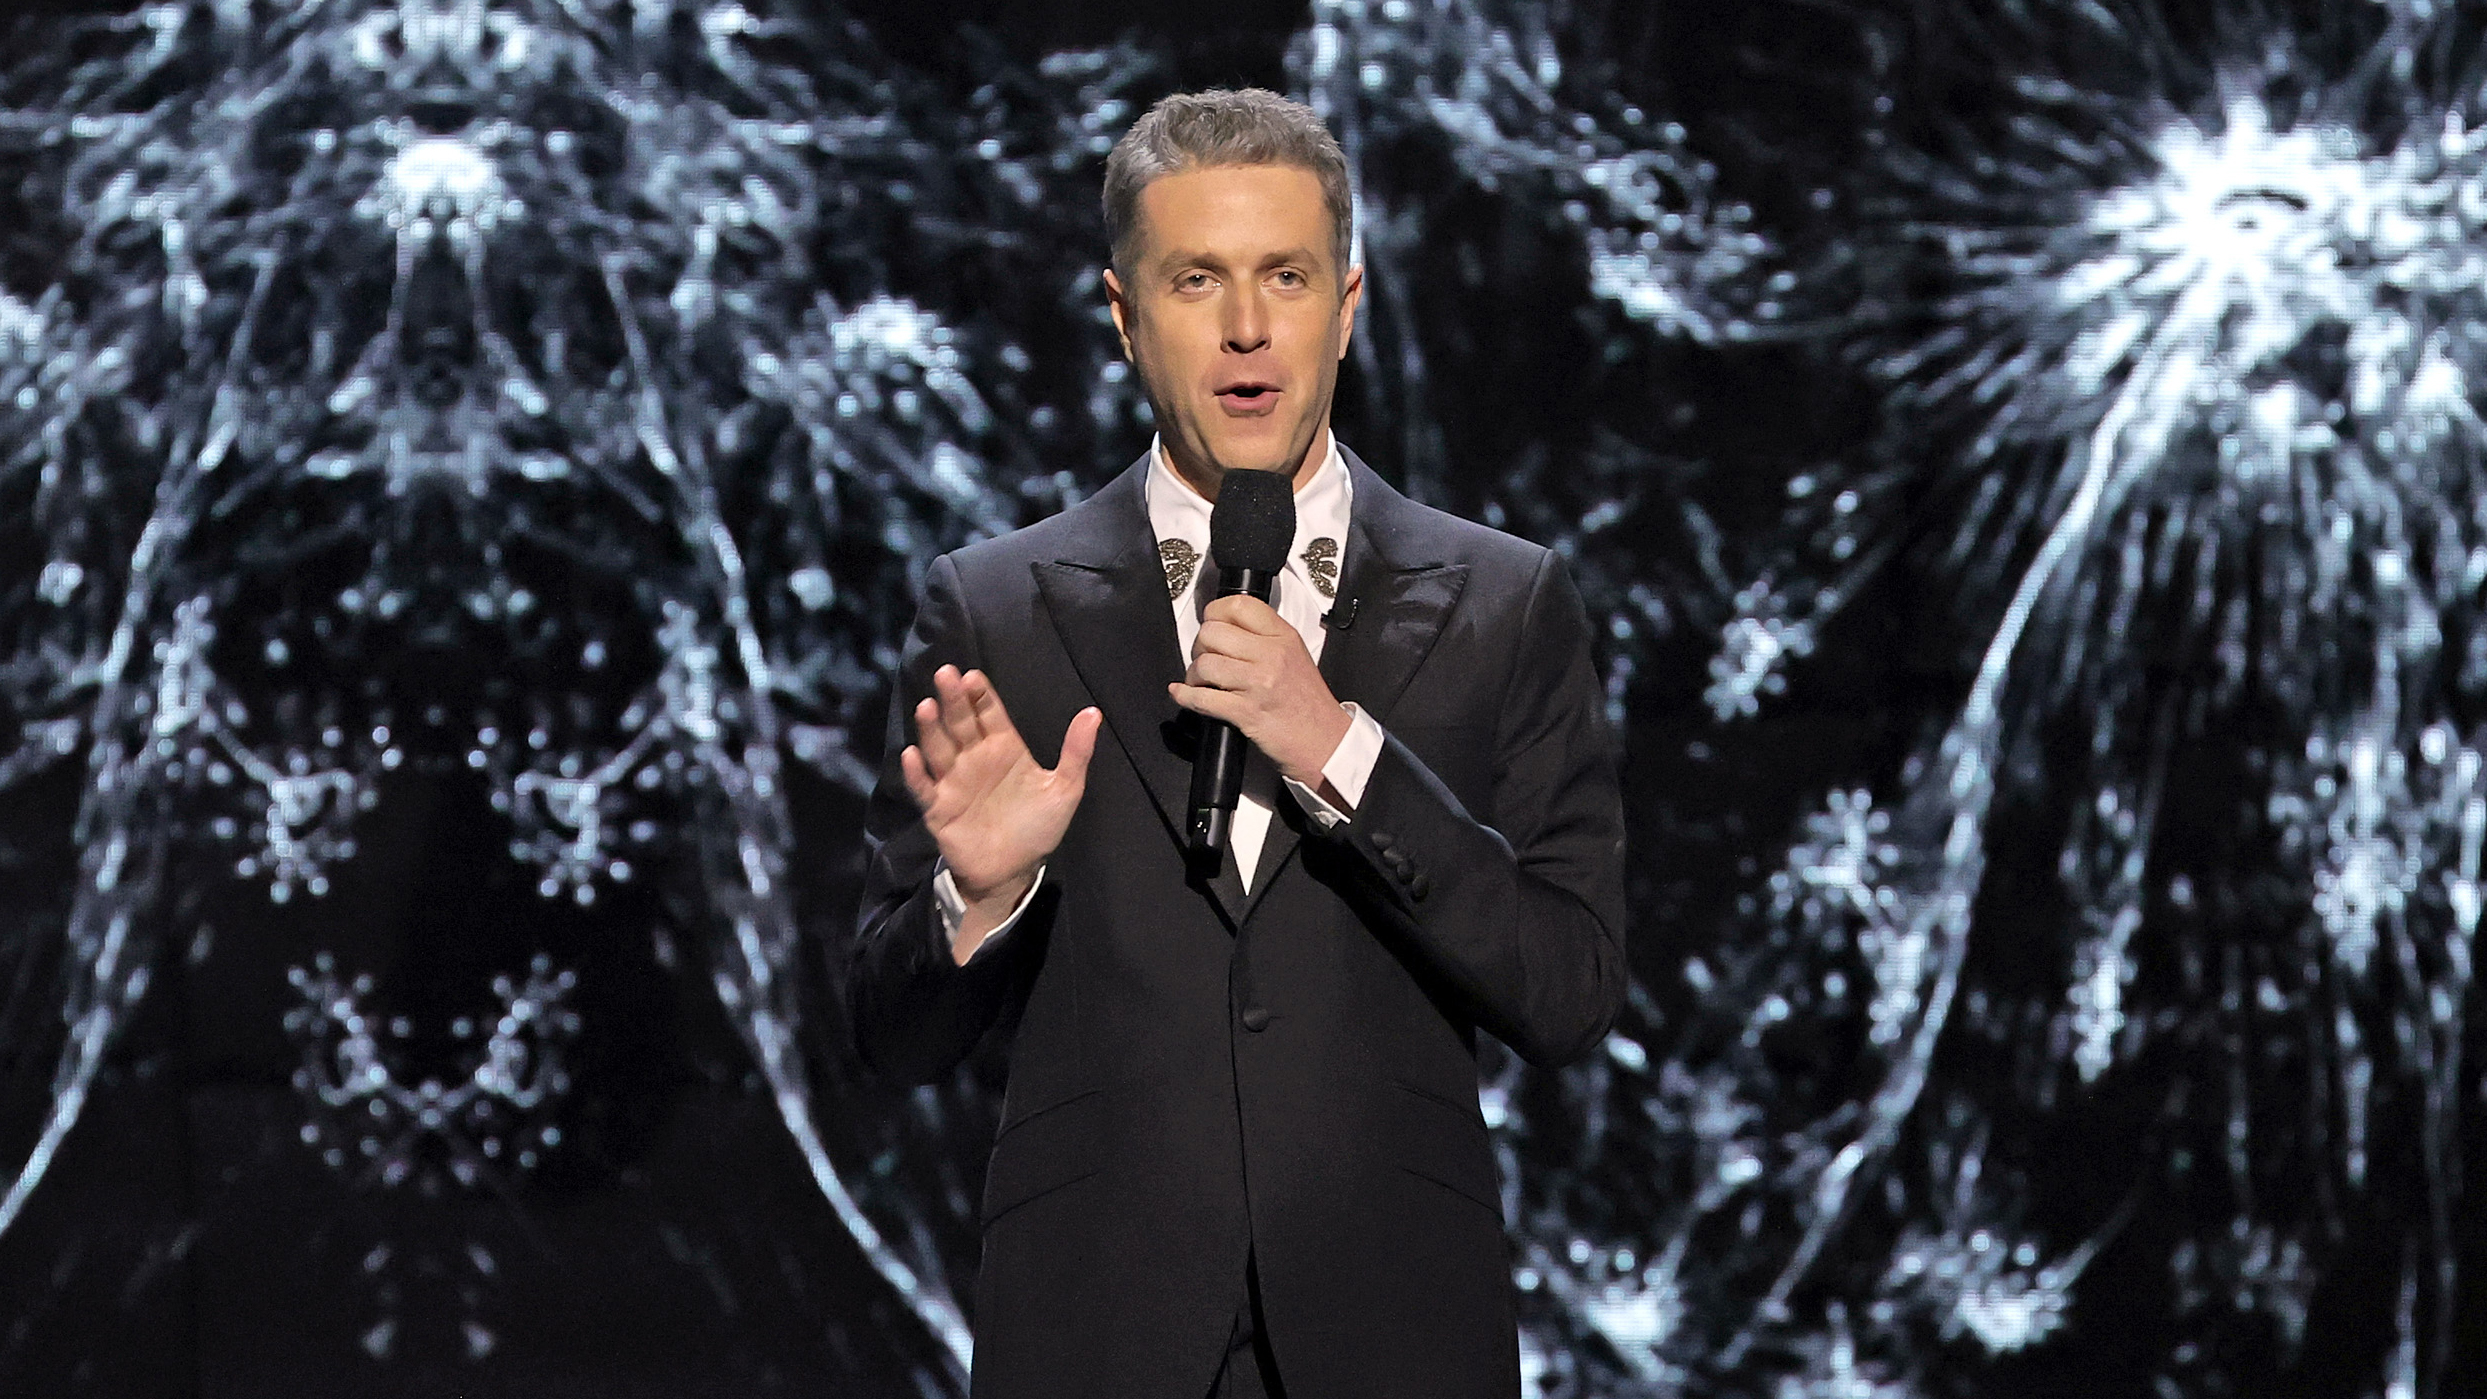 Geoff Keighley: The Game Awards 2022 will be biggest show yet